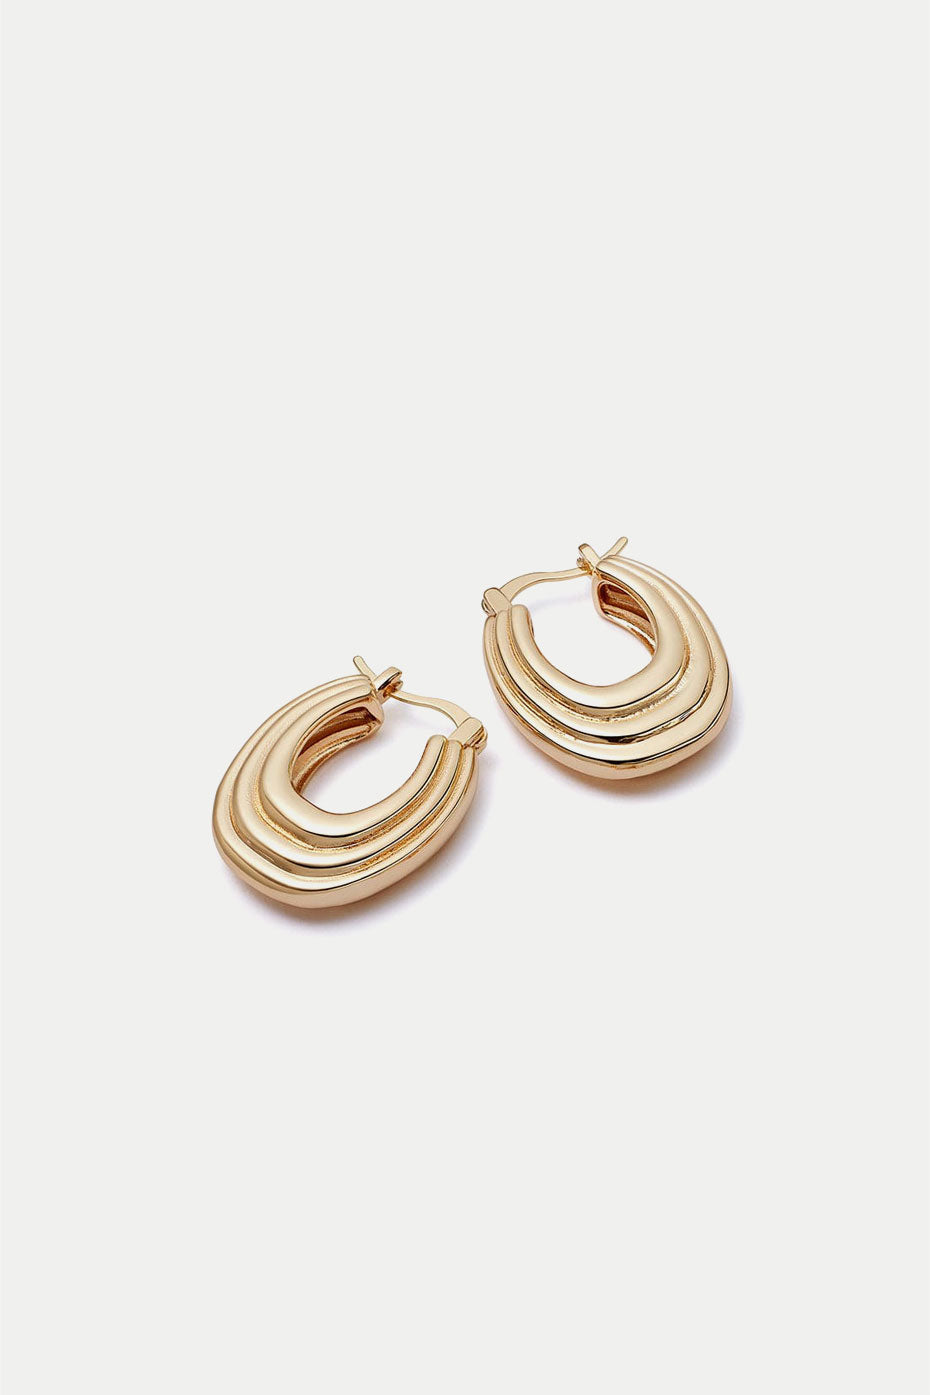 Daisy London Gold Plated Polly Sayer Mini Gradient Ridged Hoops